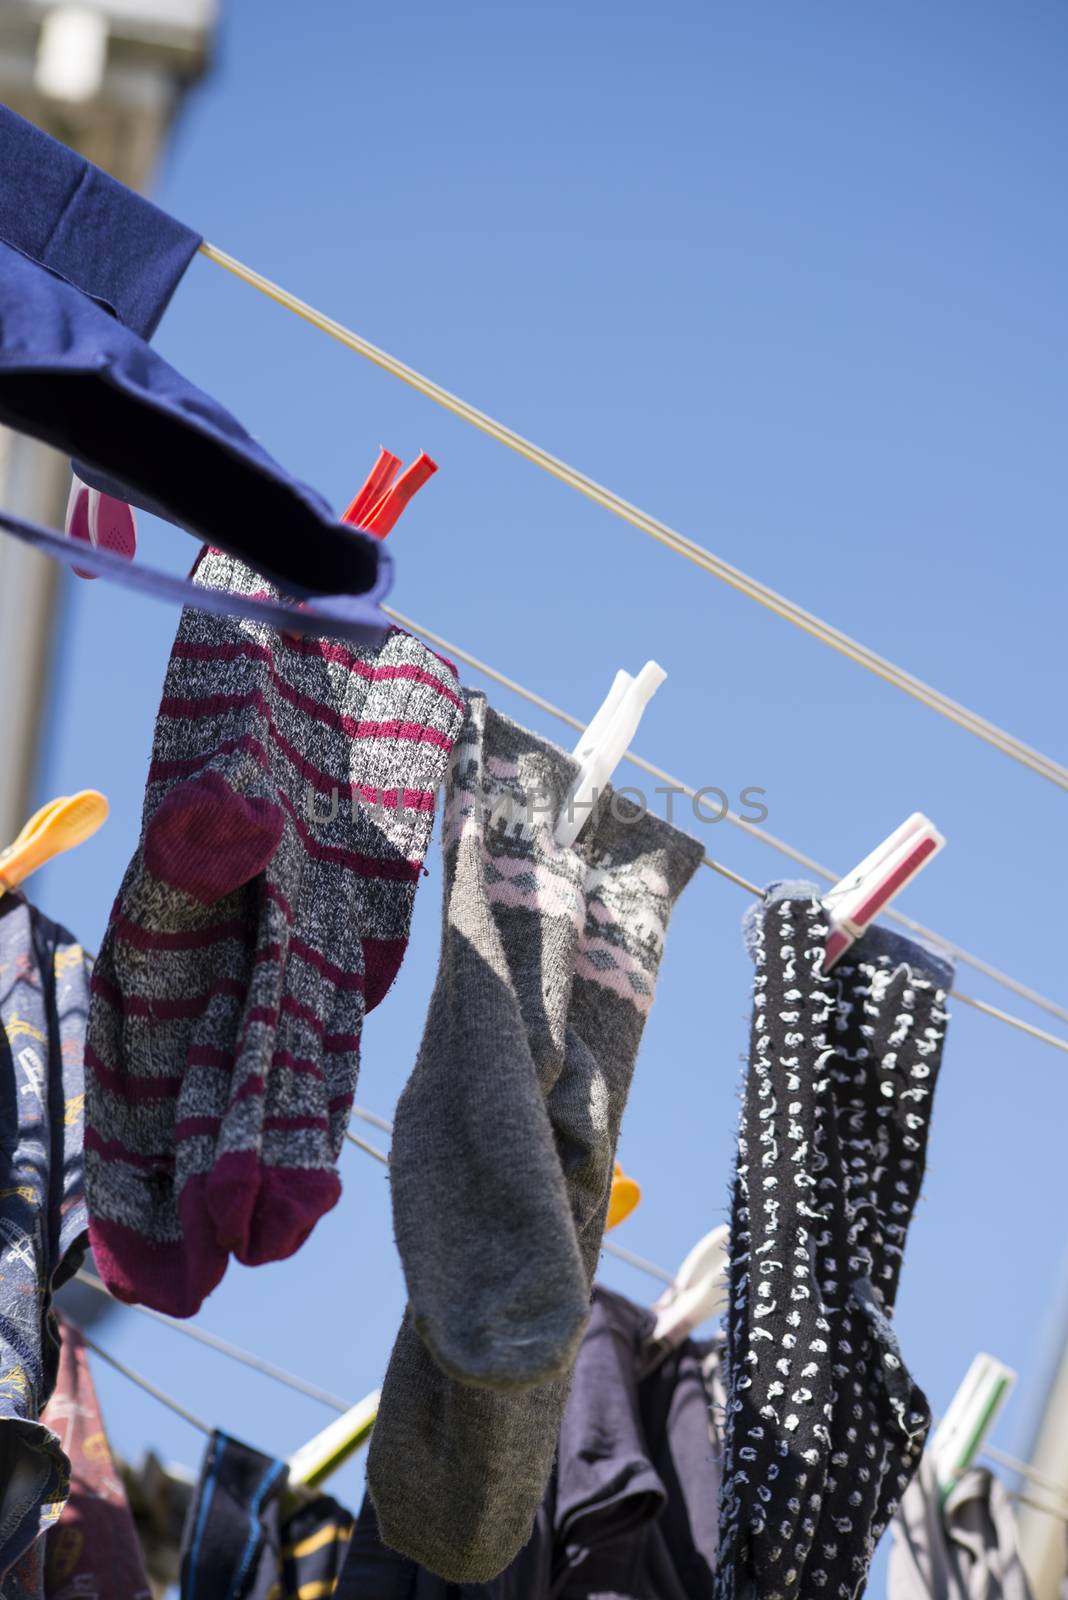 washing line with clothes out to dry